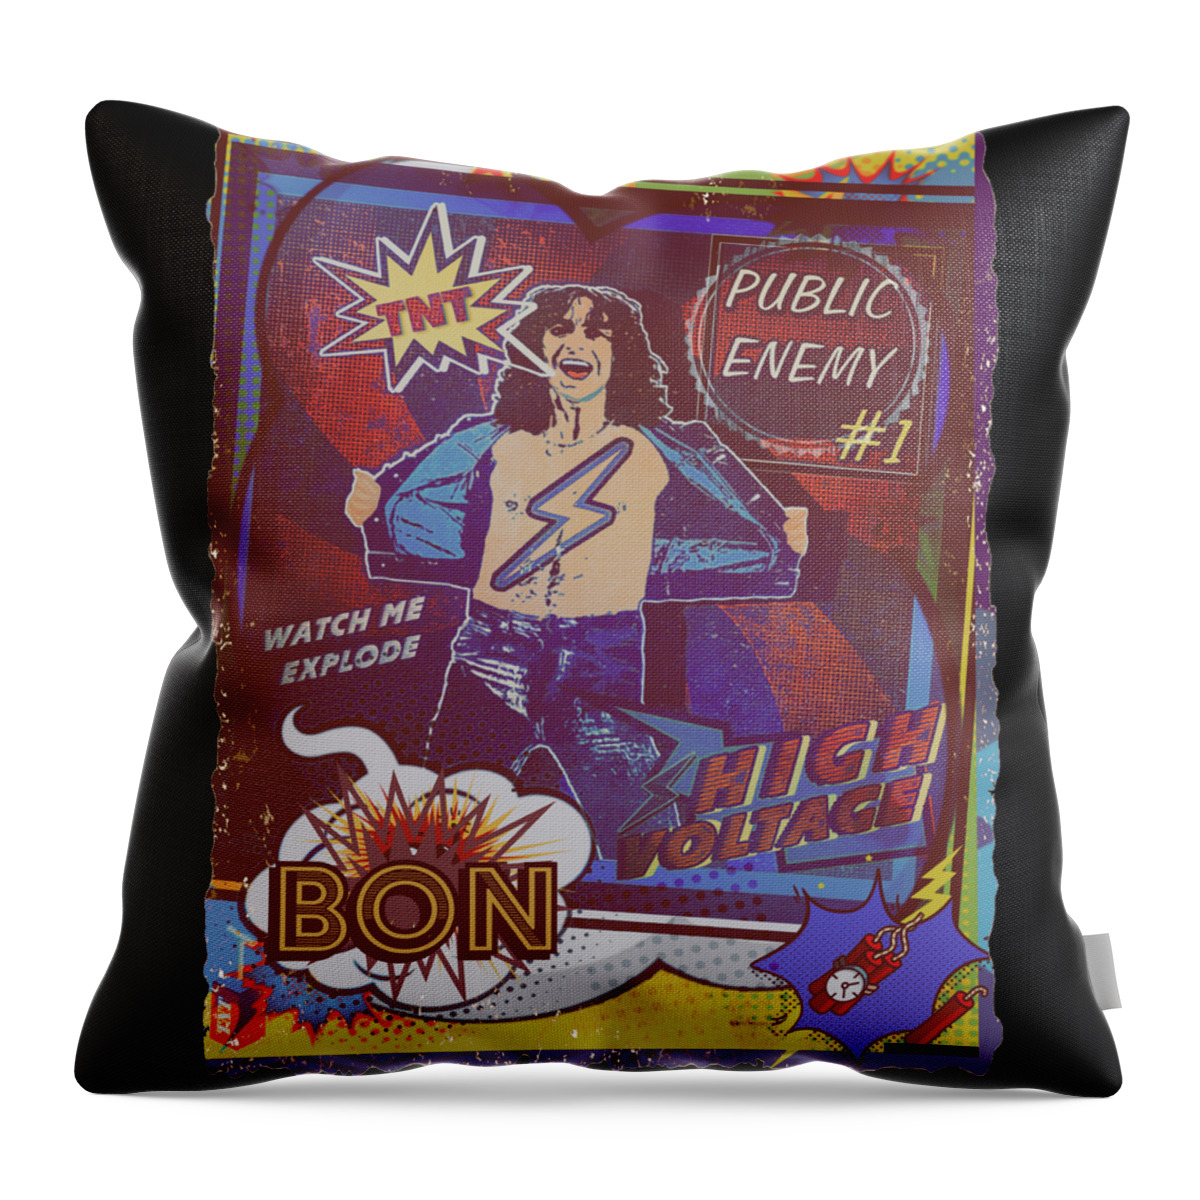 Acdc Throw Pillow featuring the digital art High Voltage Comic Book Cover by Christina Rick